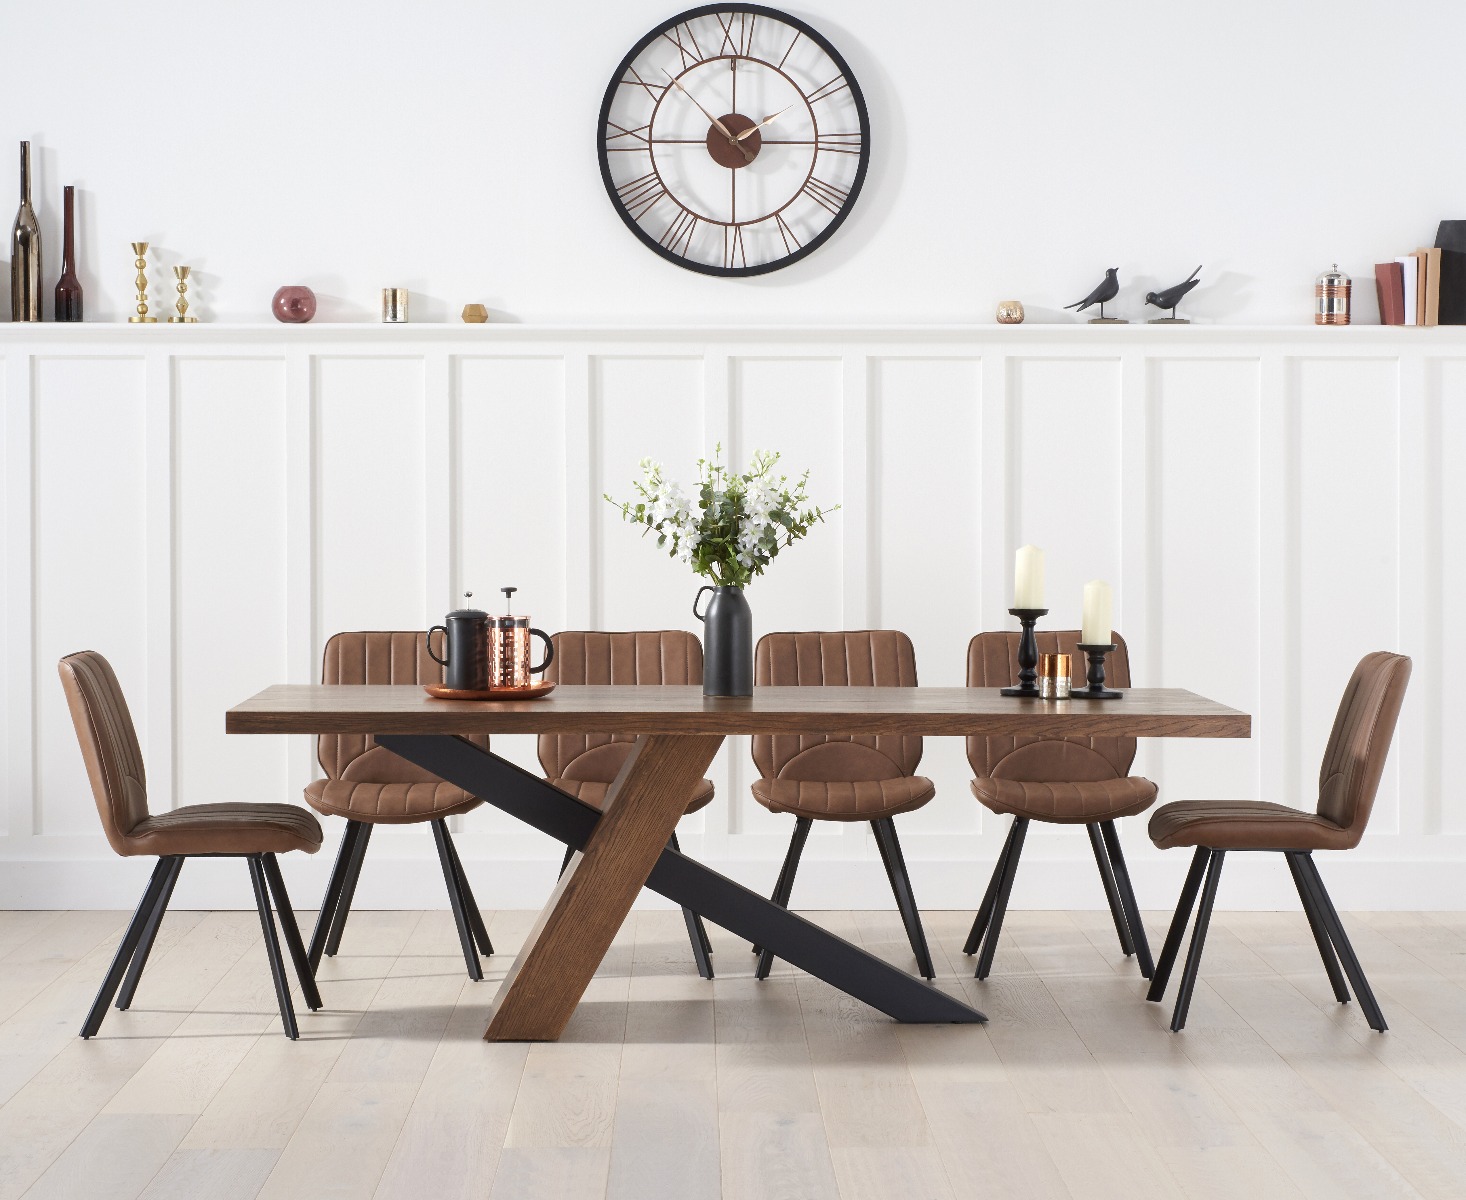 Chateau 225cm Black Leg Industrial Dining Table With 6 Brown Hendrick Faux Leather Dining Chairs